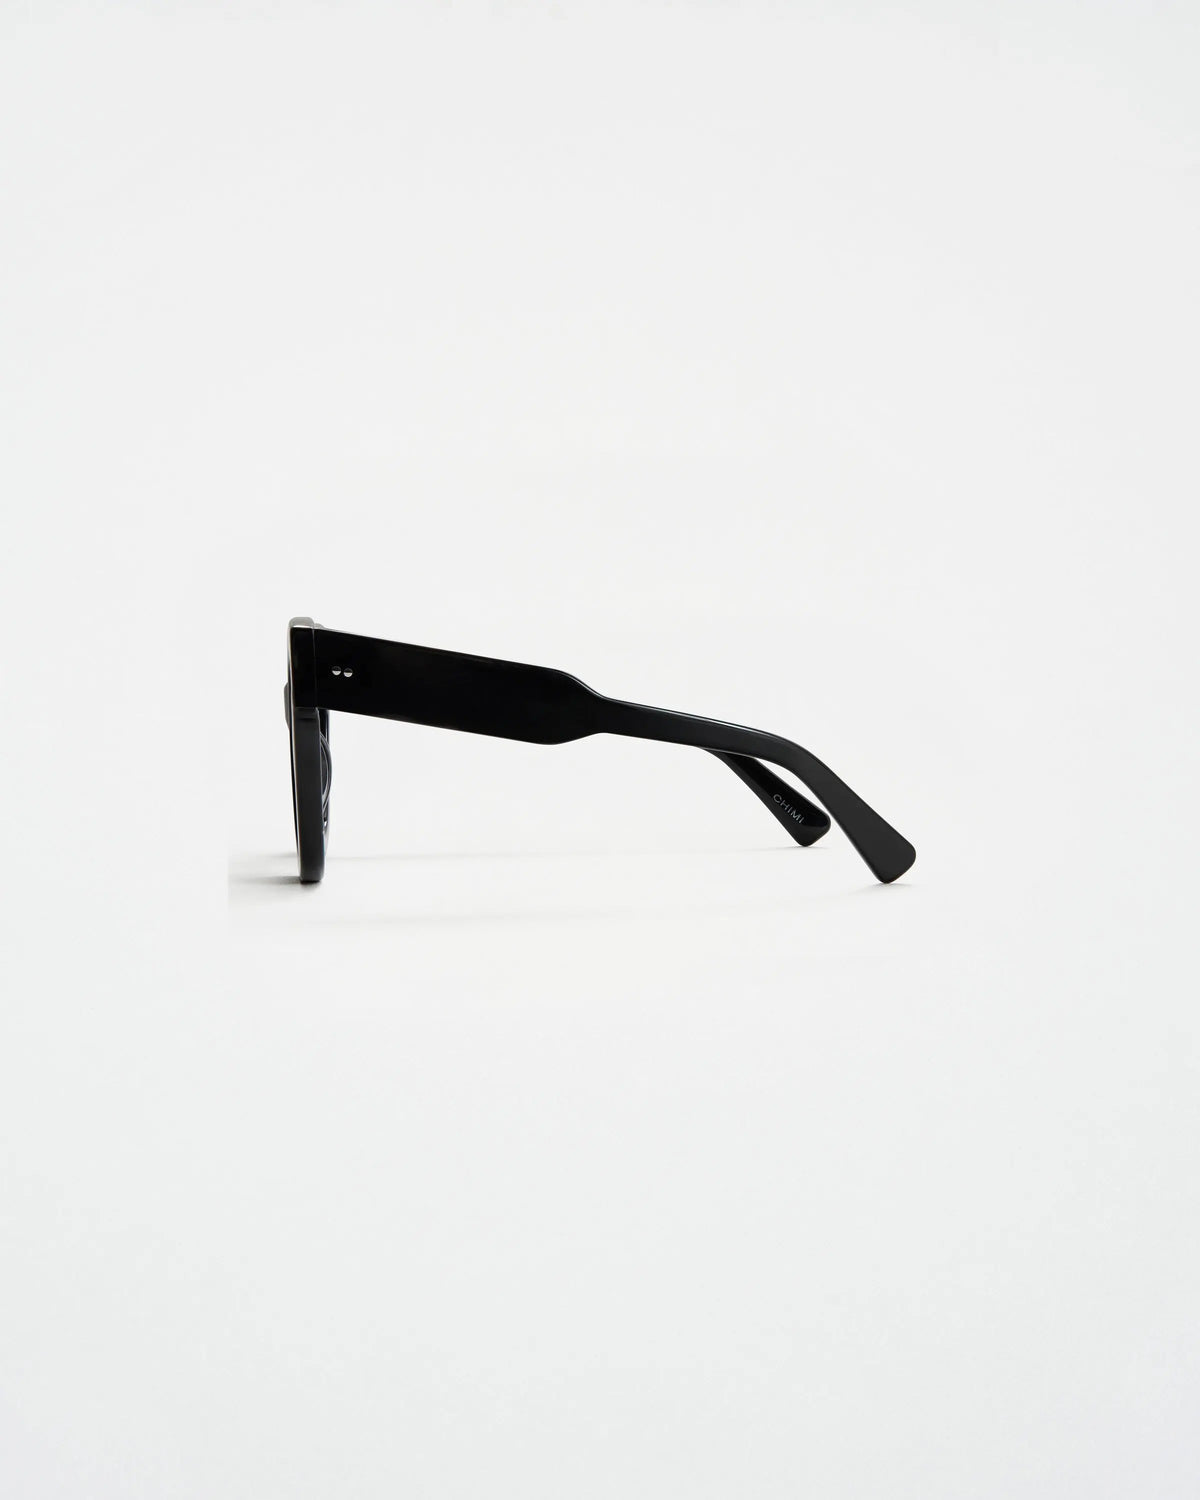 Side view of black sunglasses